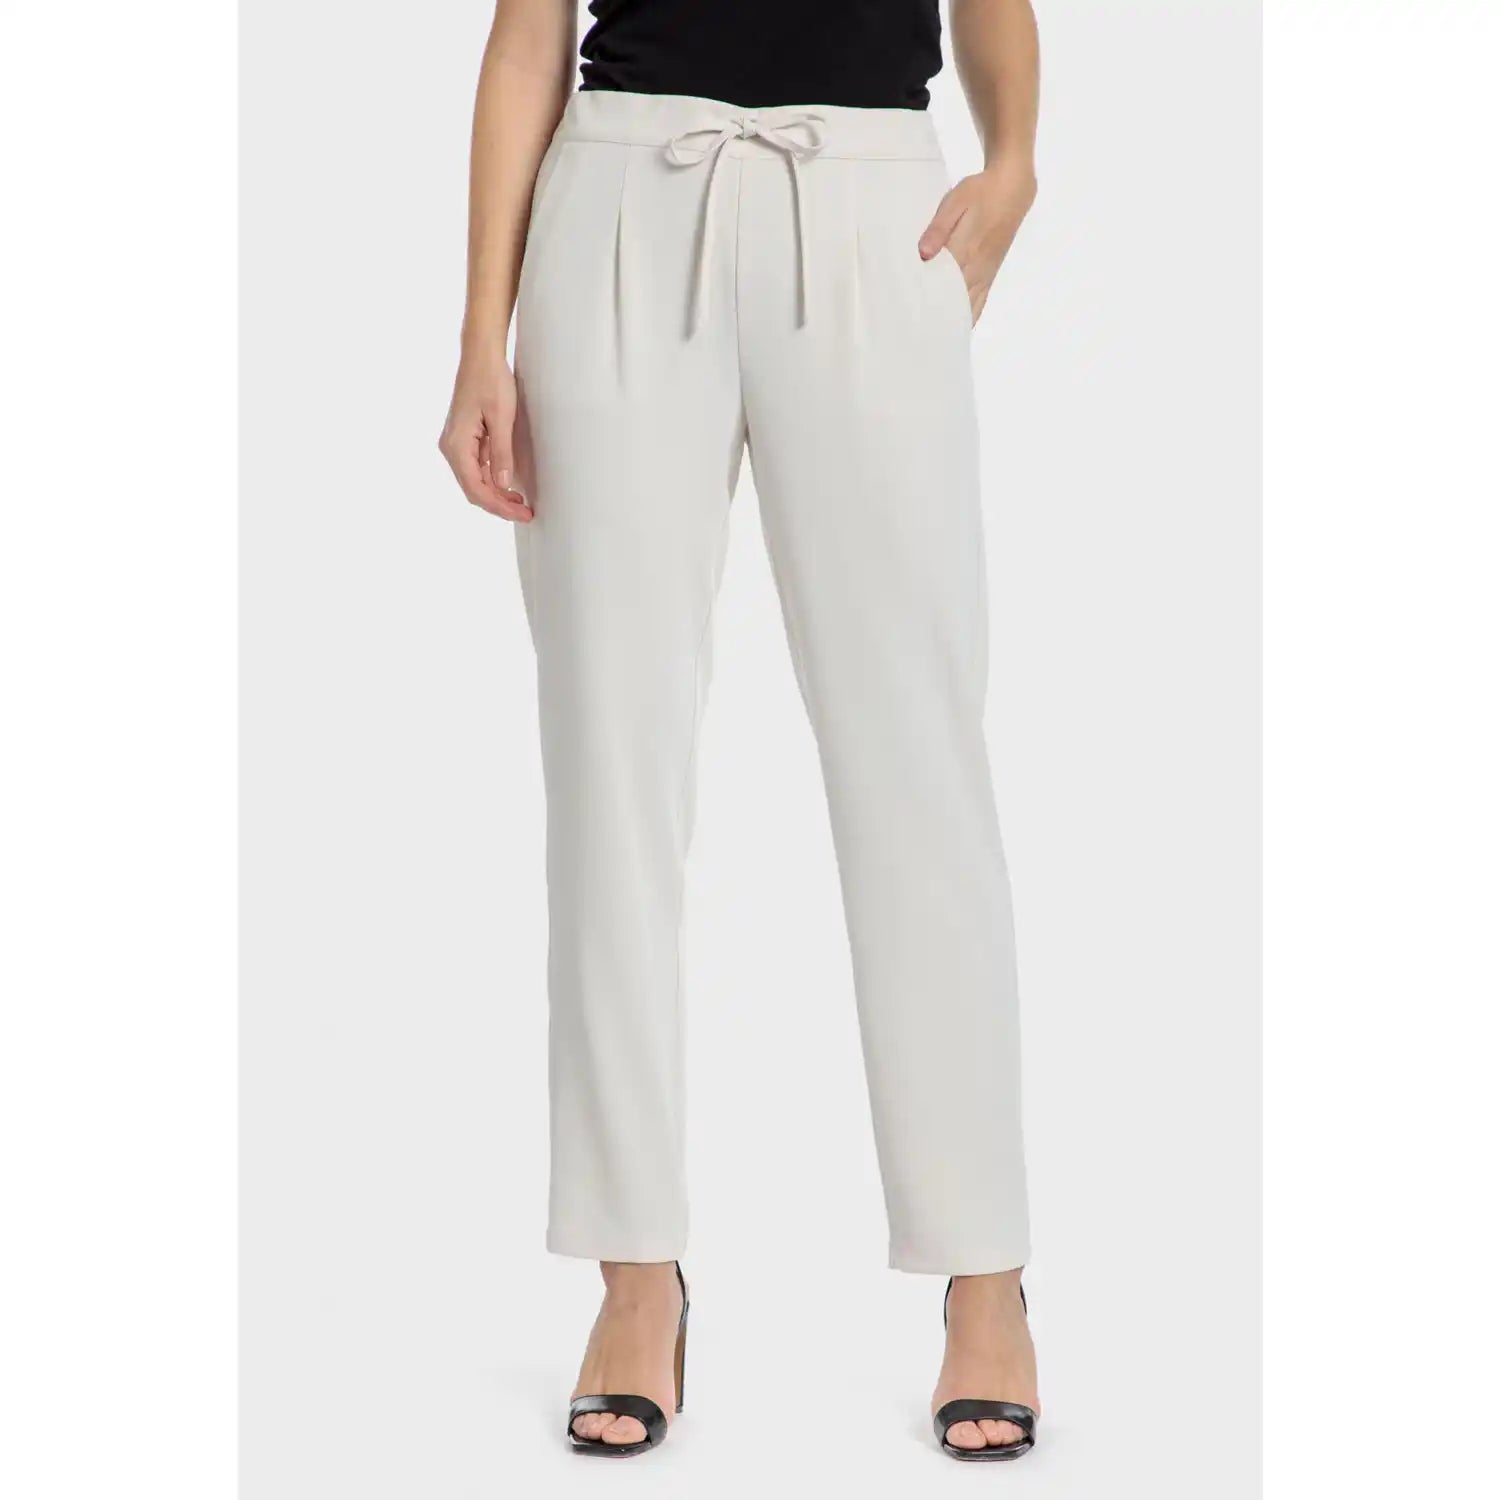 Punt Roma Crepe Trousers - White 1 Shaws Department Stores